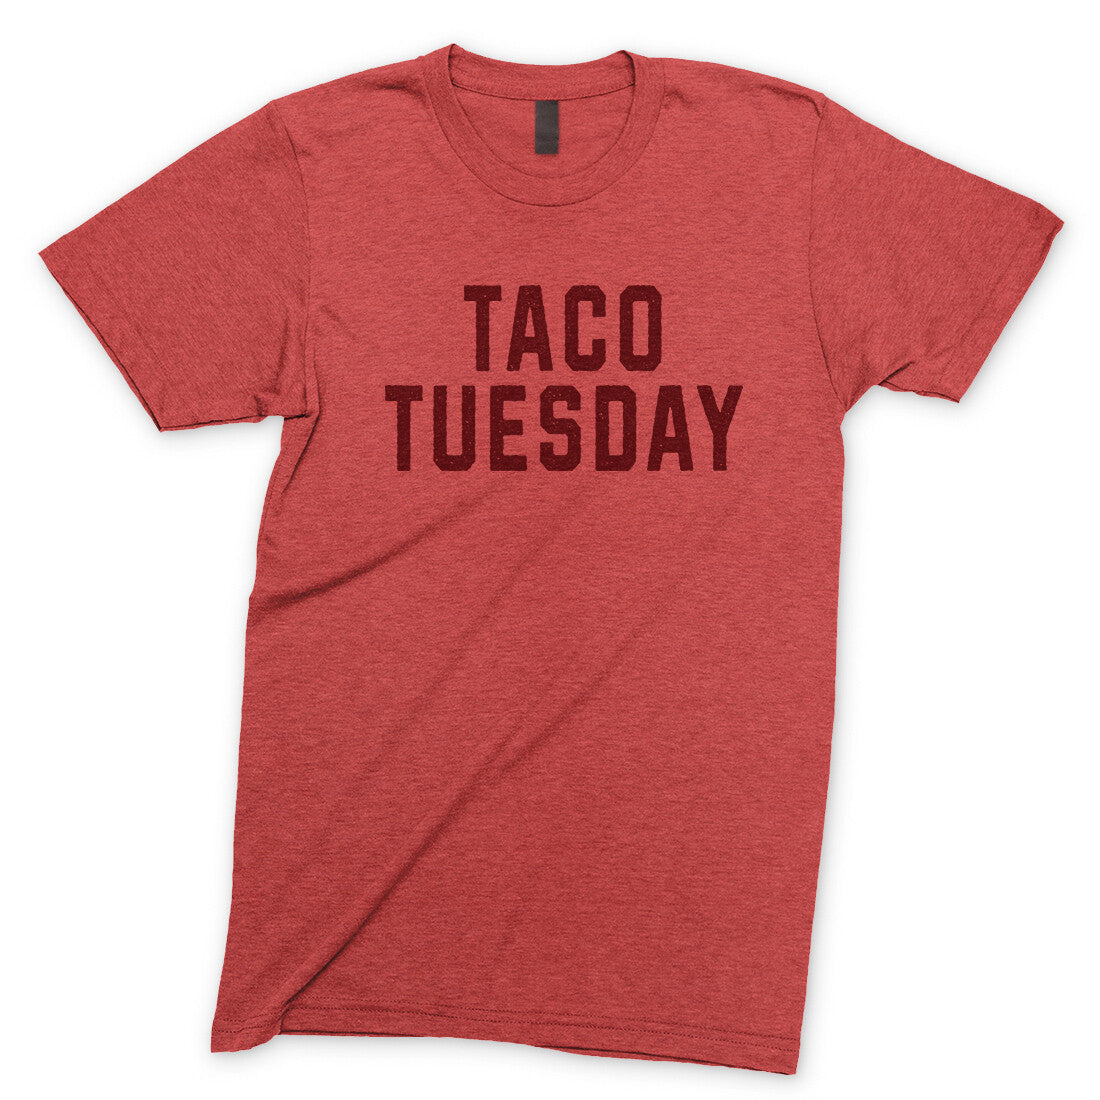 Taco Tuesday in Heather Red Color